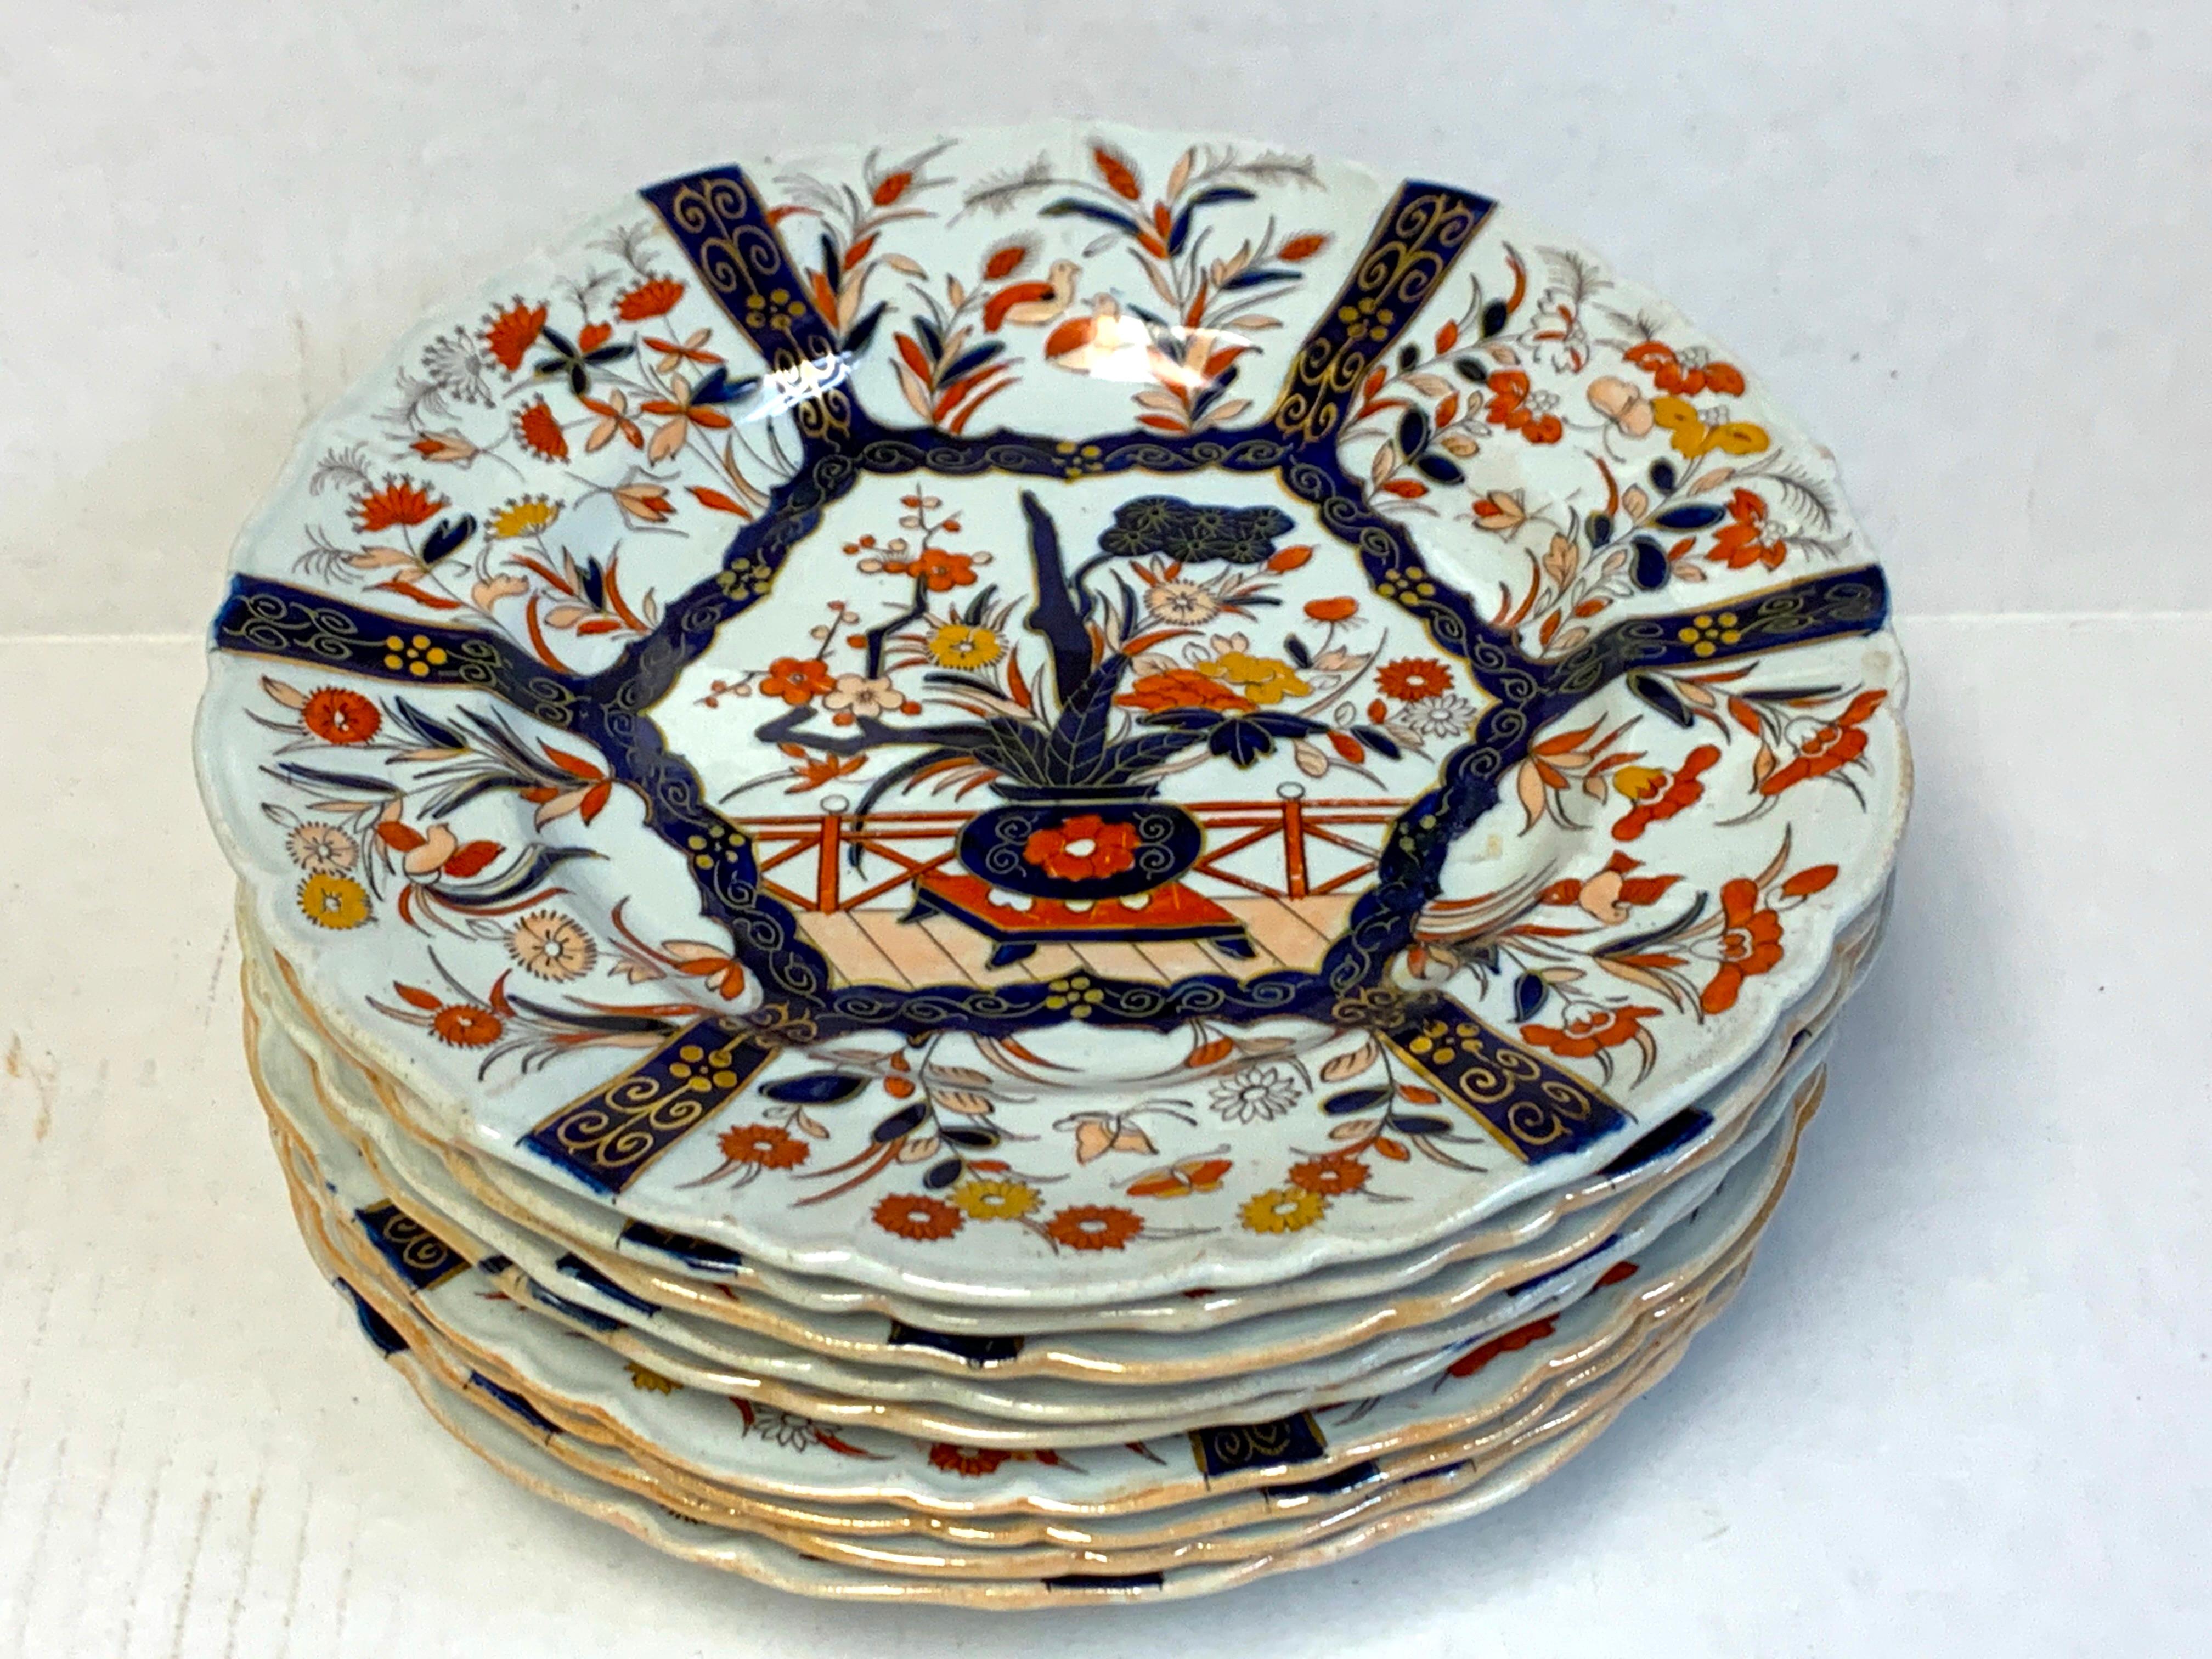 Nine Masons Ironstone dinner plates Imari /Indian tree pattern variation
A rare find 10.75 diameter in excellent antique condition, no chips, cracks or repairs
At the time of posting we have nine, 9